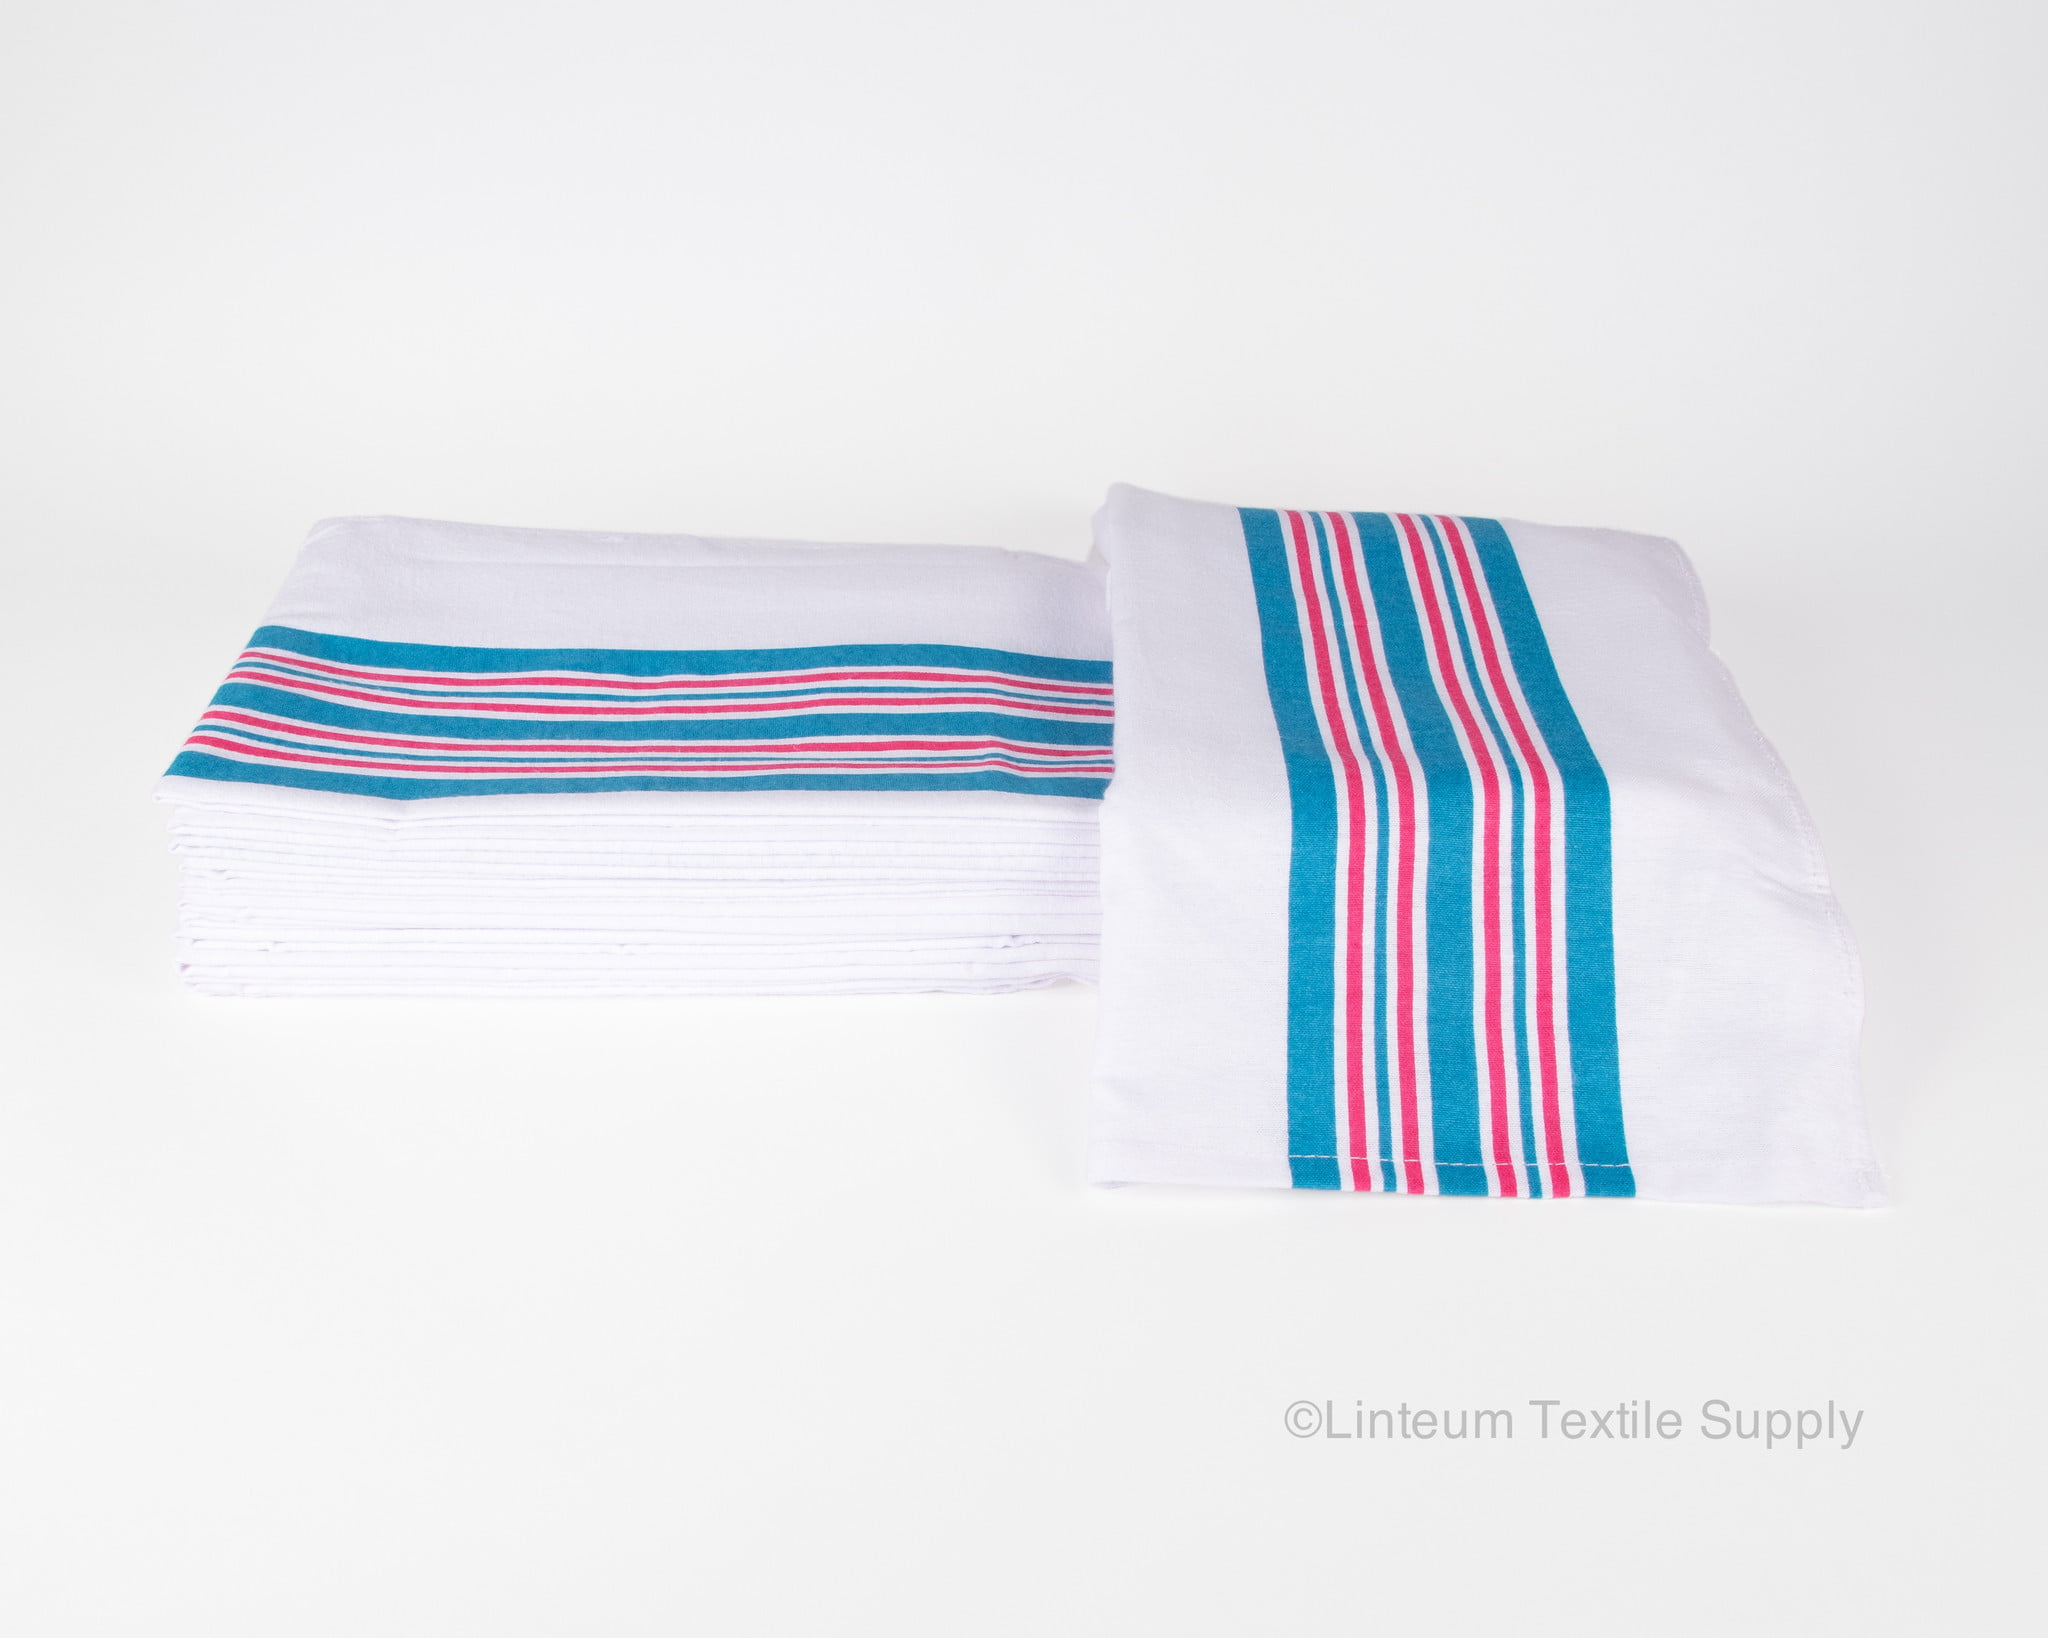 30x40-4 PK BABY INFANT HOSPITAL RECEIVING BLANKETS 100% COTTON WARM BLANKETS 